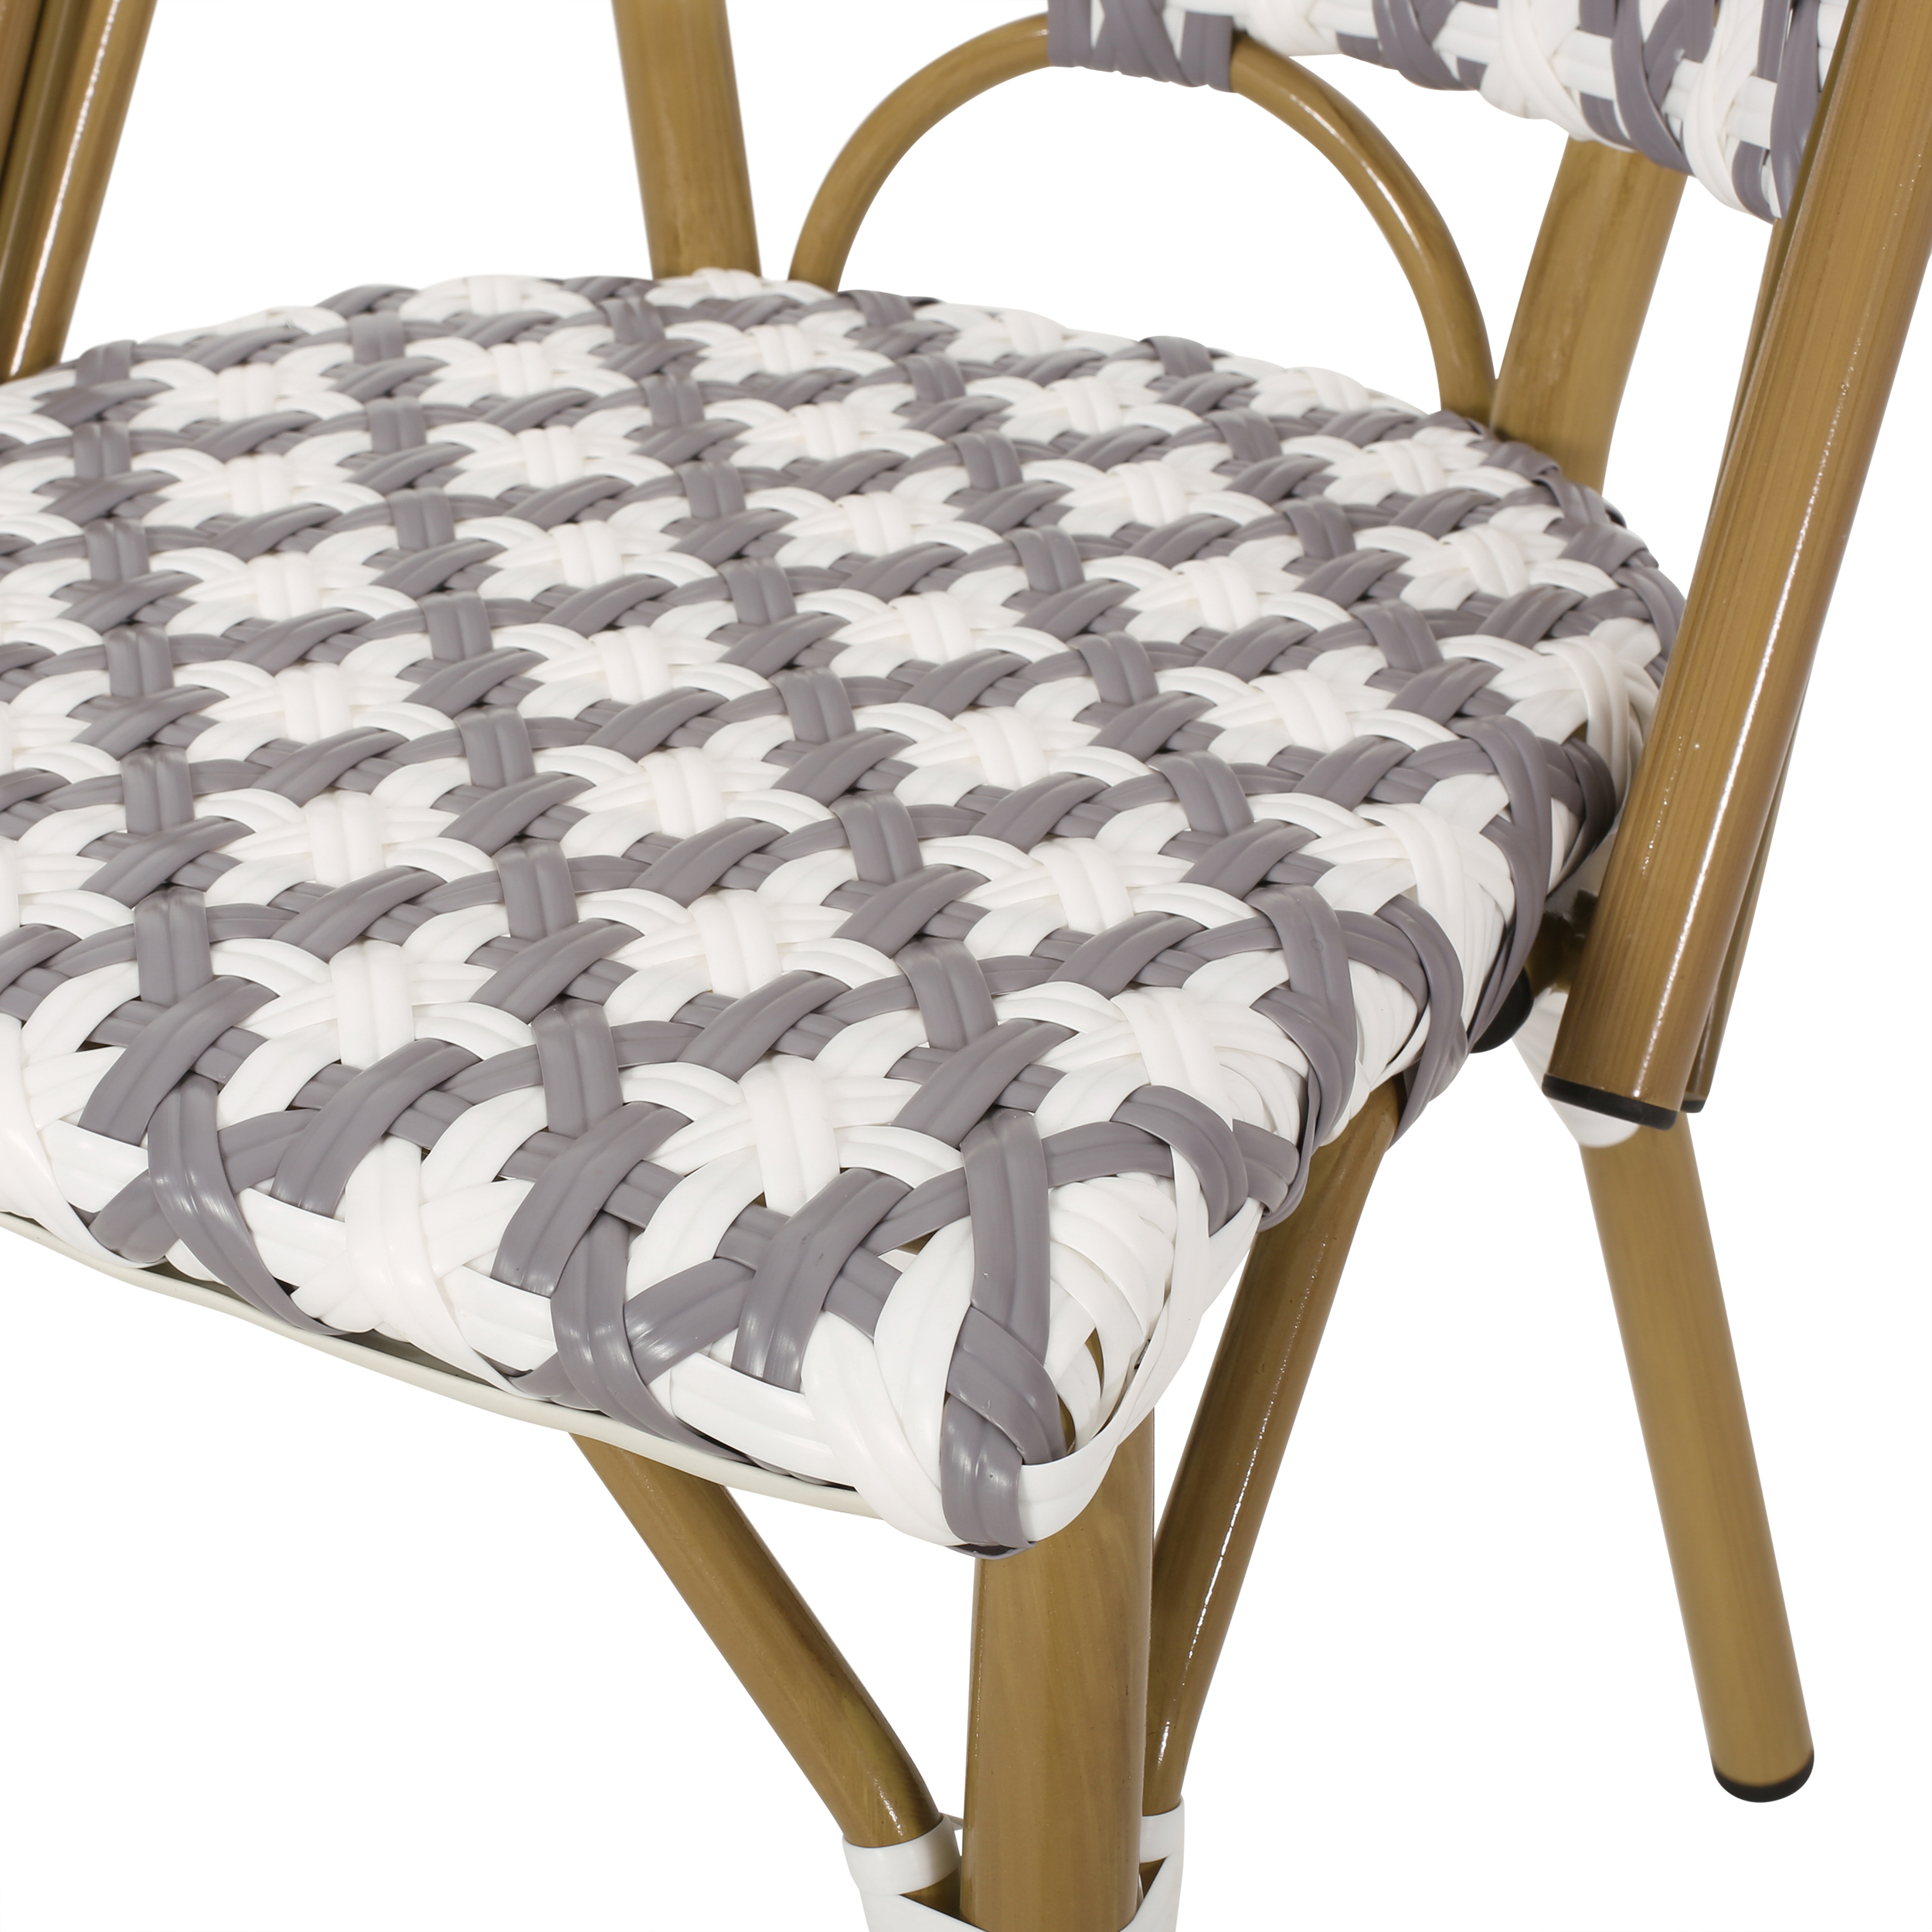 Jordy Outdoor French Bistro Chair , Set of 4, Gray, White, and Bamboo Finish - image 4 of 7